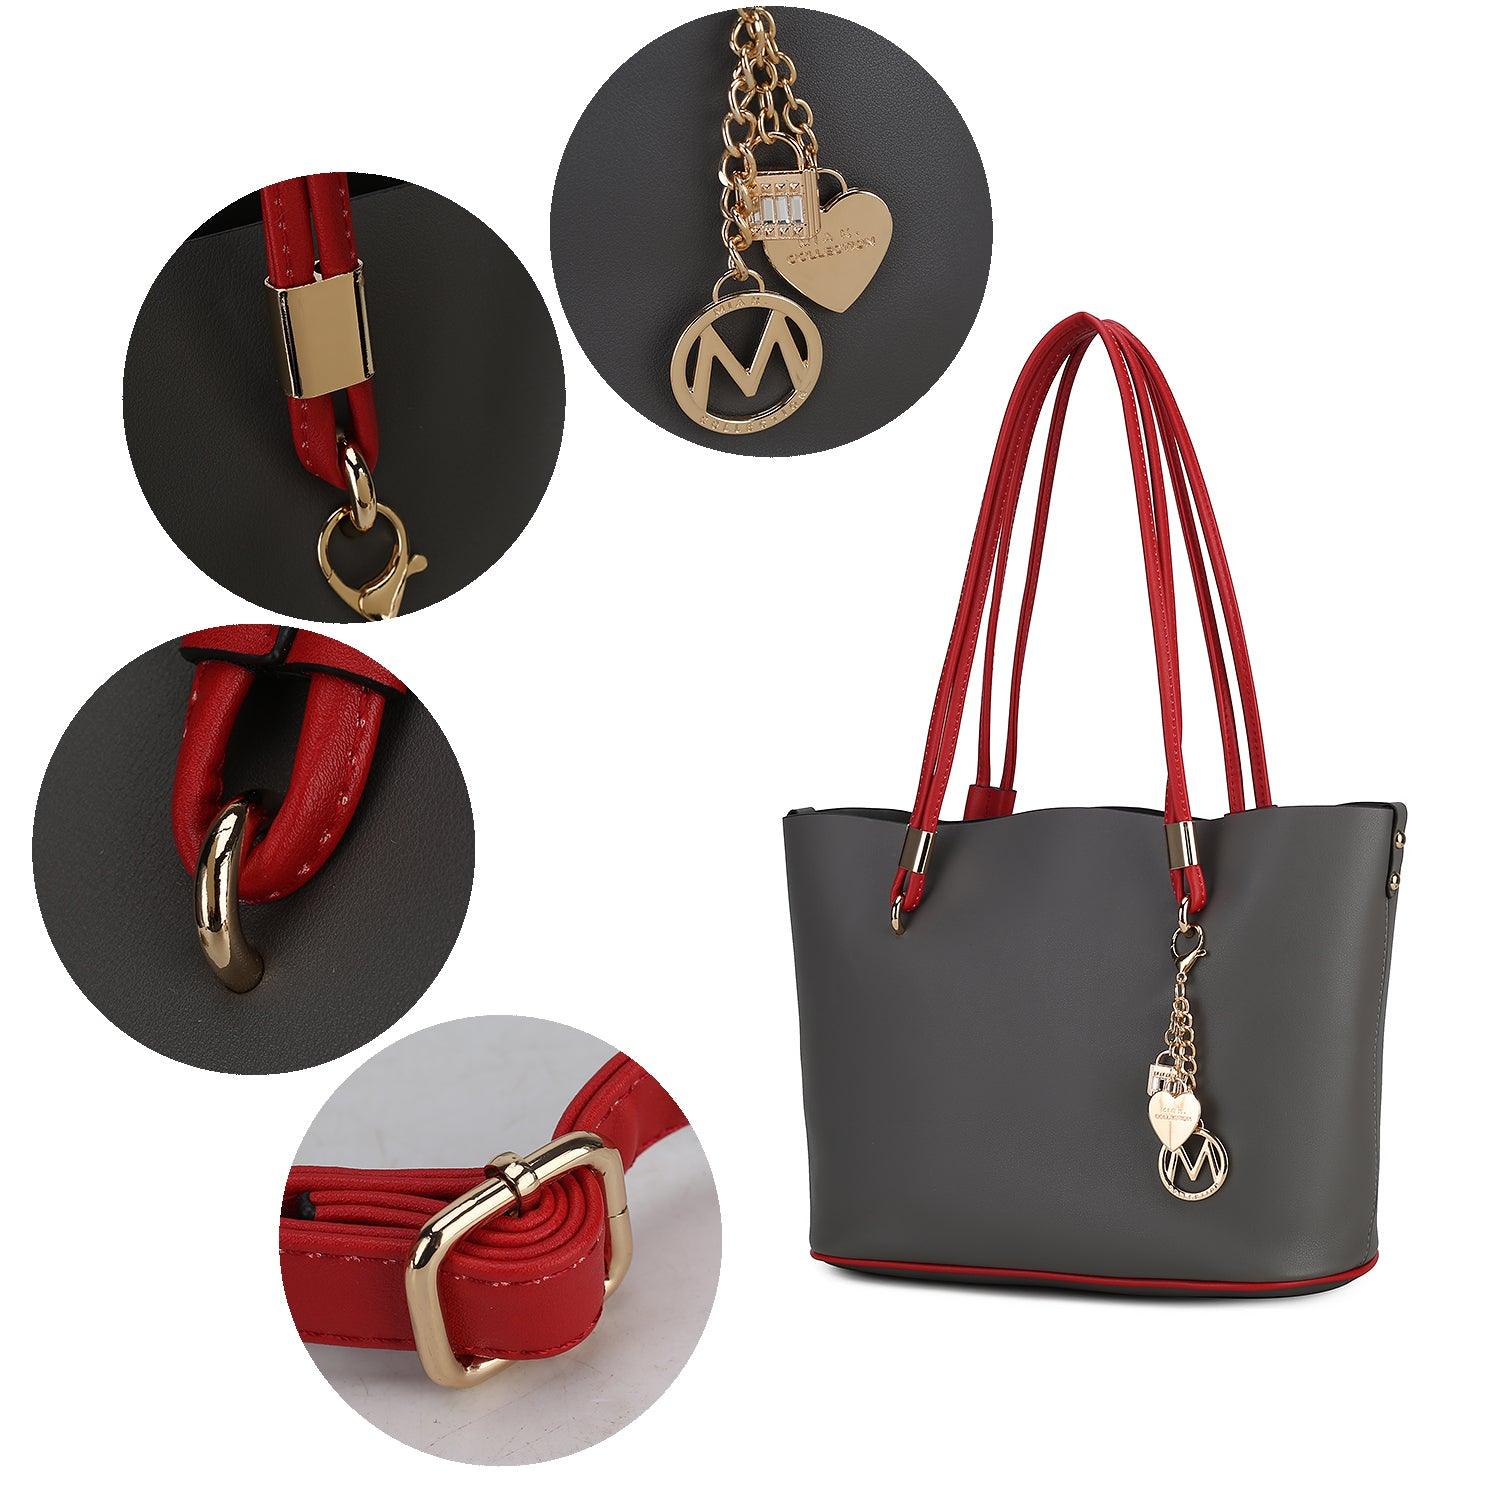 Wallets, Handbags & Accessories Malay Tote Handbag With Cosmetic Pouch Vegan Leather Women